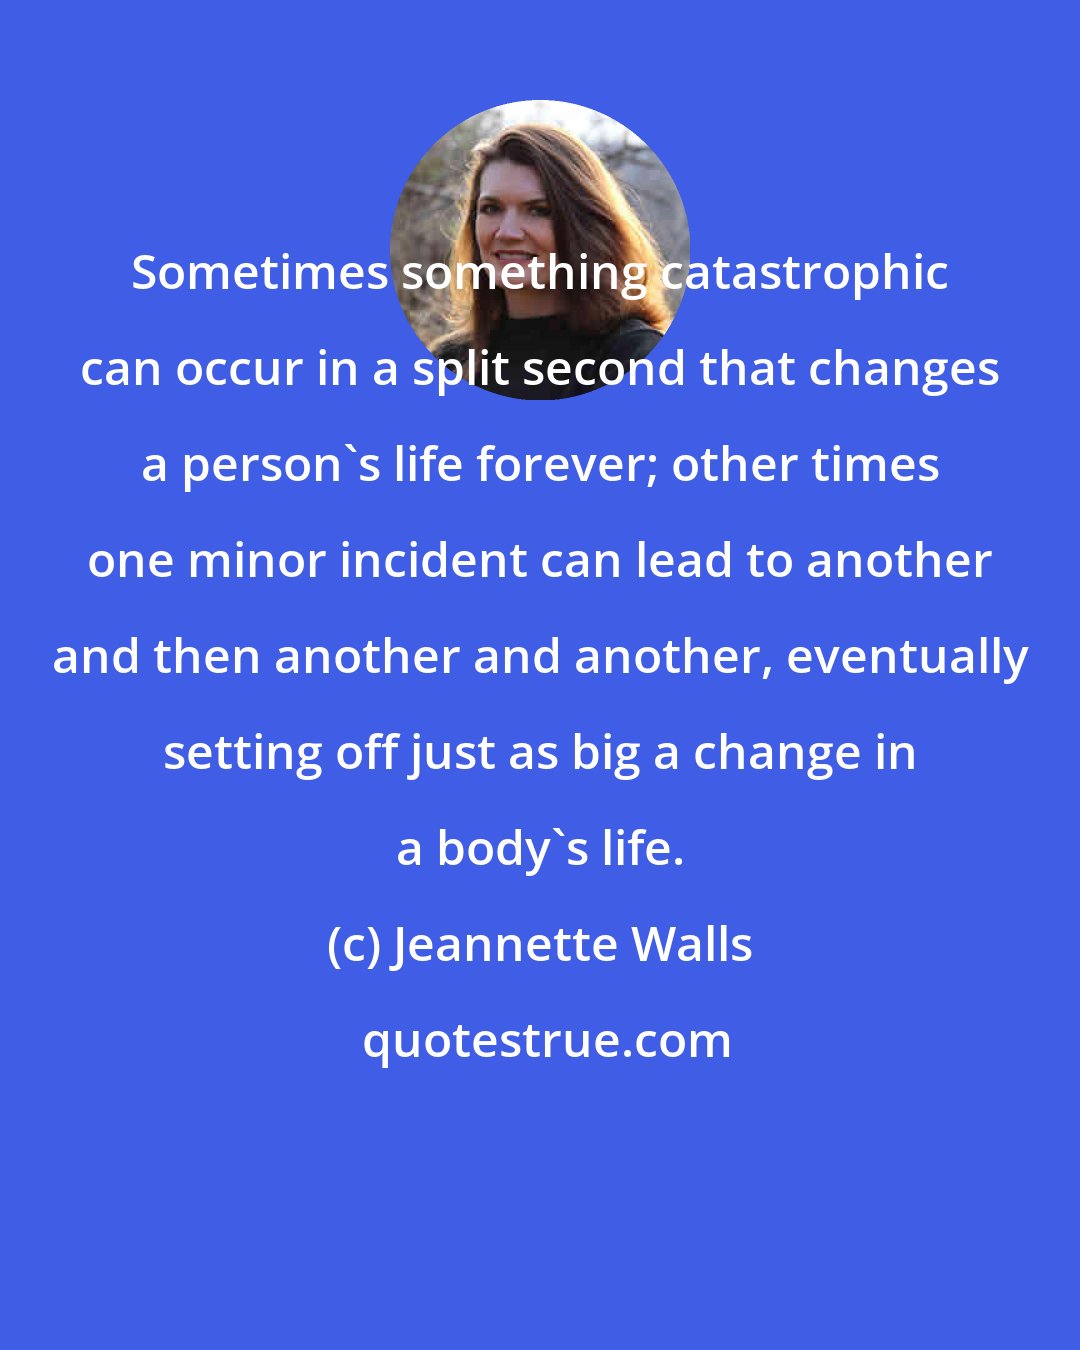 Jeannette Walls: Sometimes something catastrophic can occur in a split second that changes a person's life forever; other times one minor incident can lead to another and then another and another, eventually setting off just as big a change in a body's life.